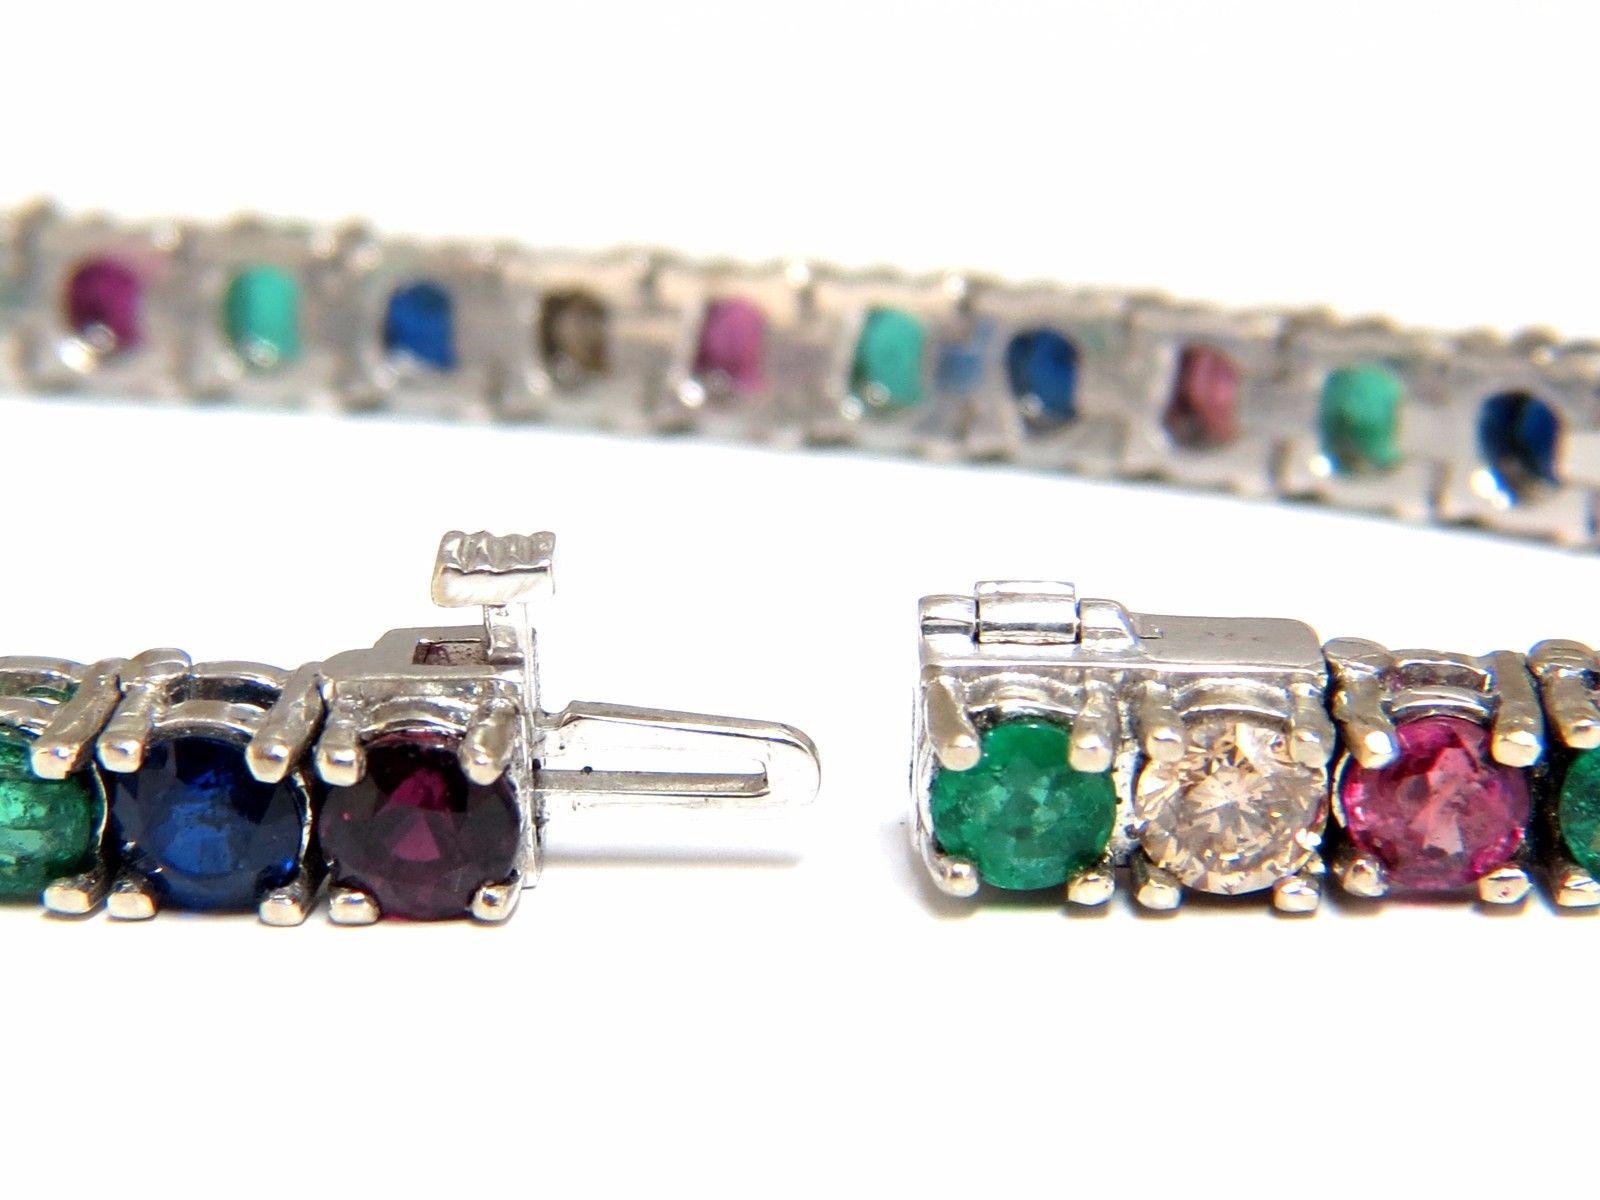 emerald and ruby bracelet